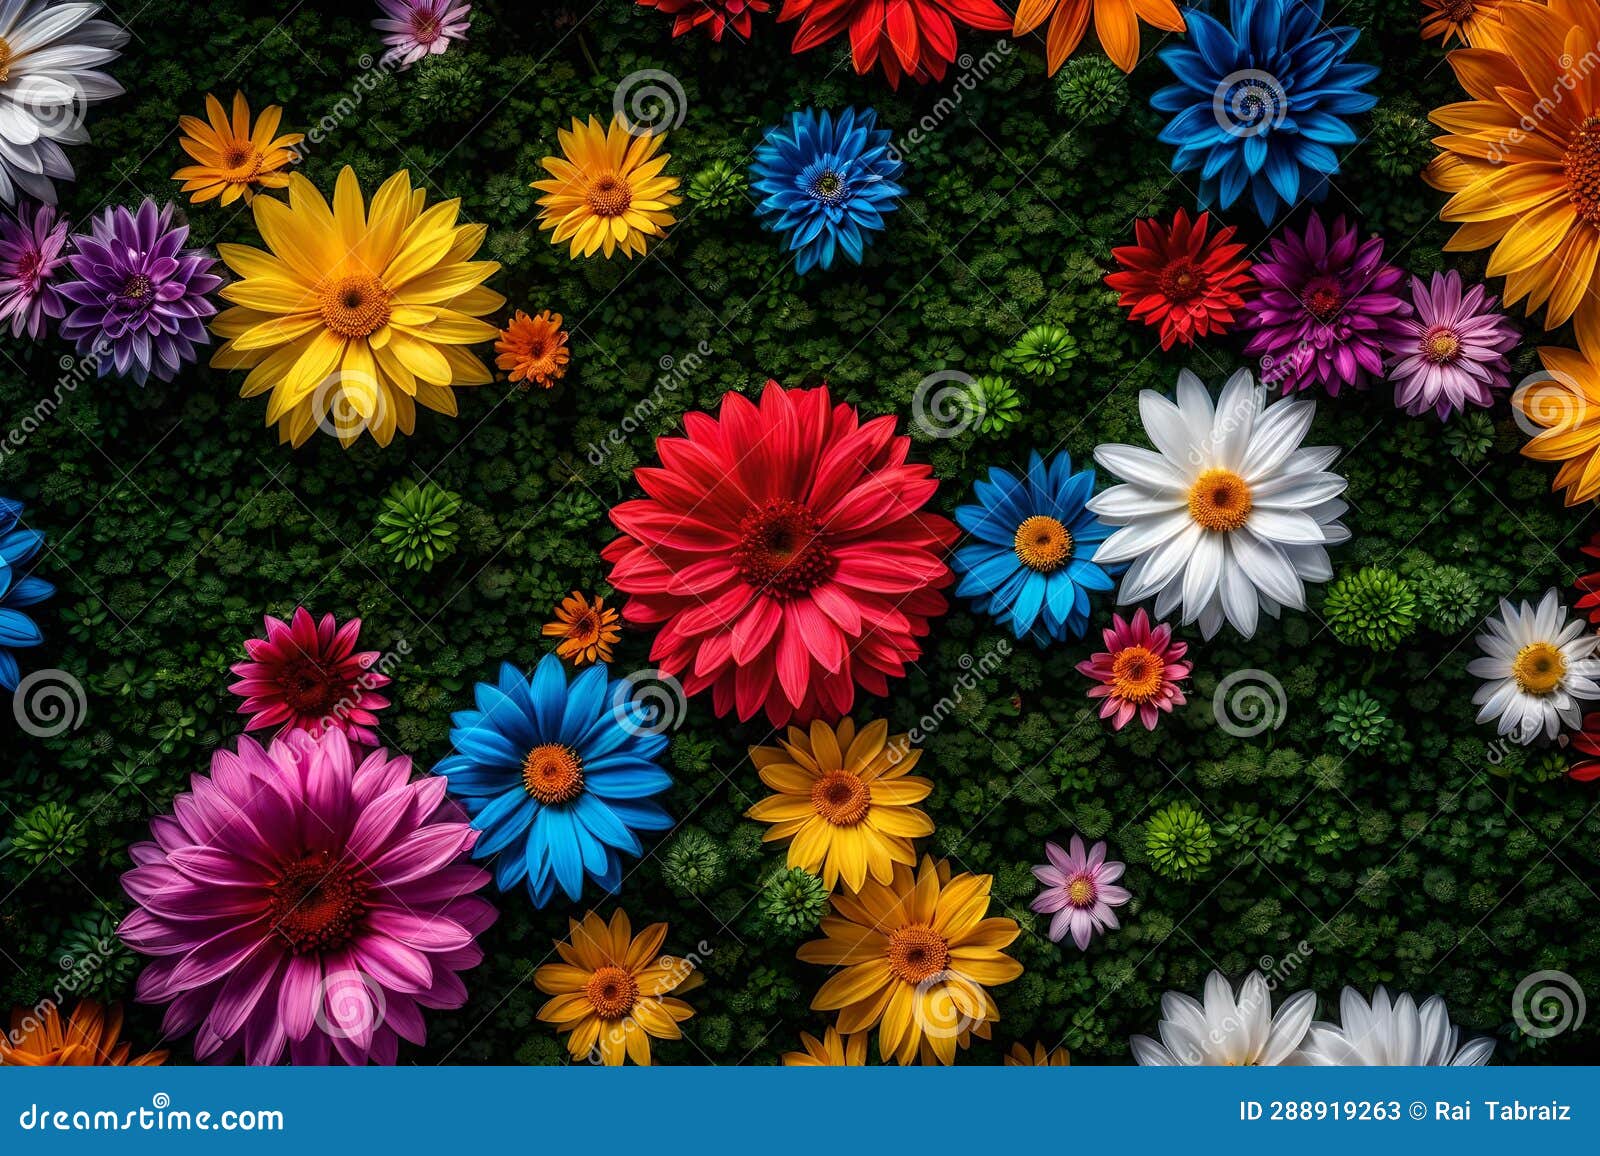 A Set of Different Color of Flowers Stock Illustration - Illustration ...